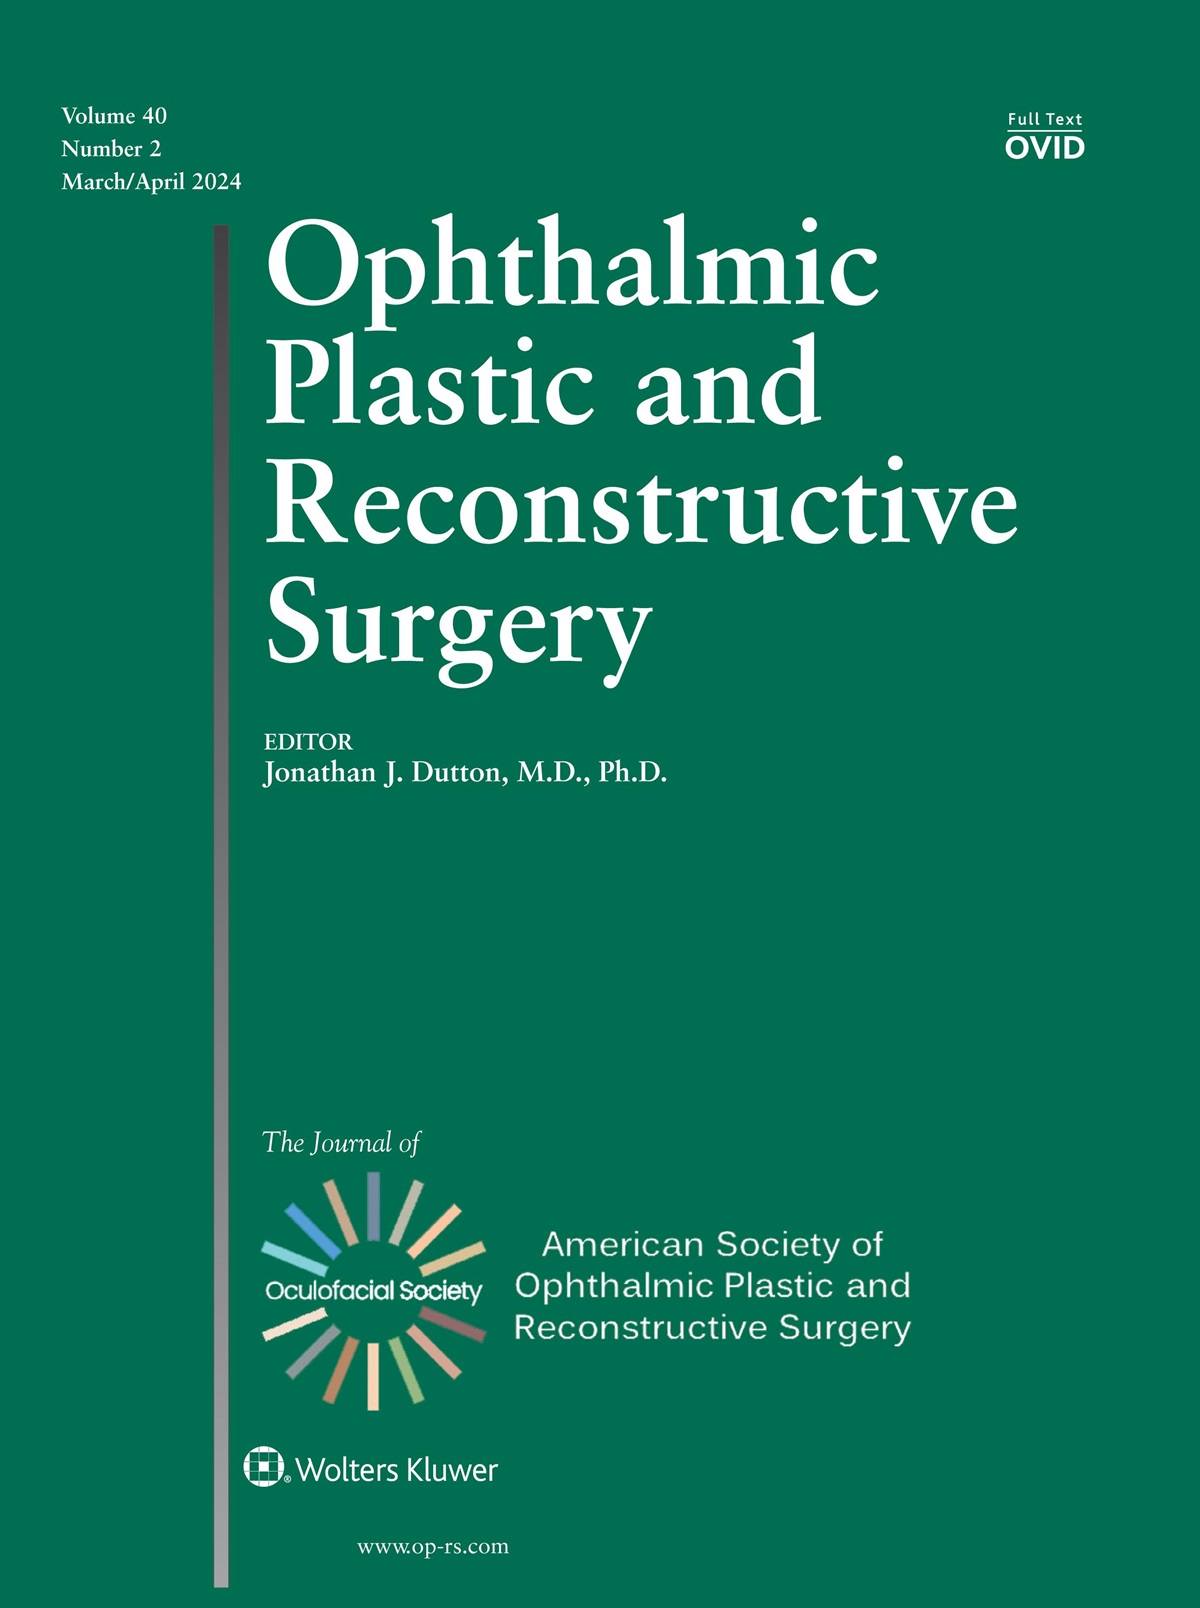 Re: “Orbital and Oculofacial Diseases and Artificial Intelligence: Evaluating the Accuracy and Readability of ChatGPT”